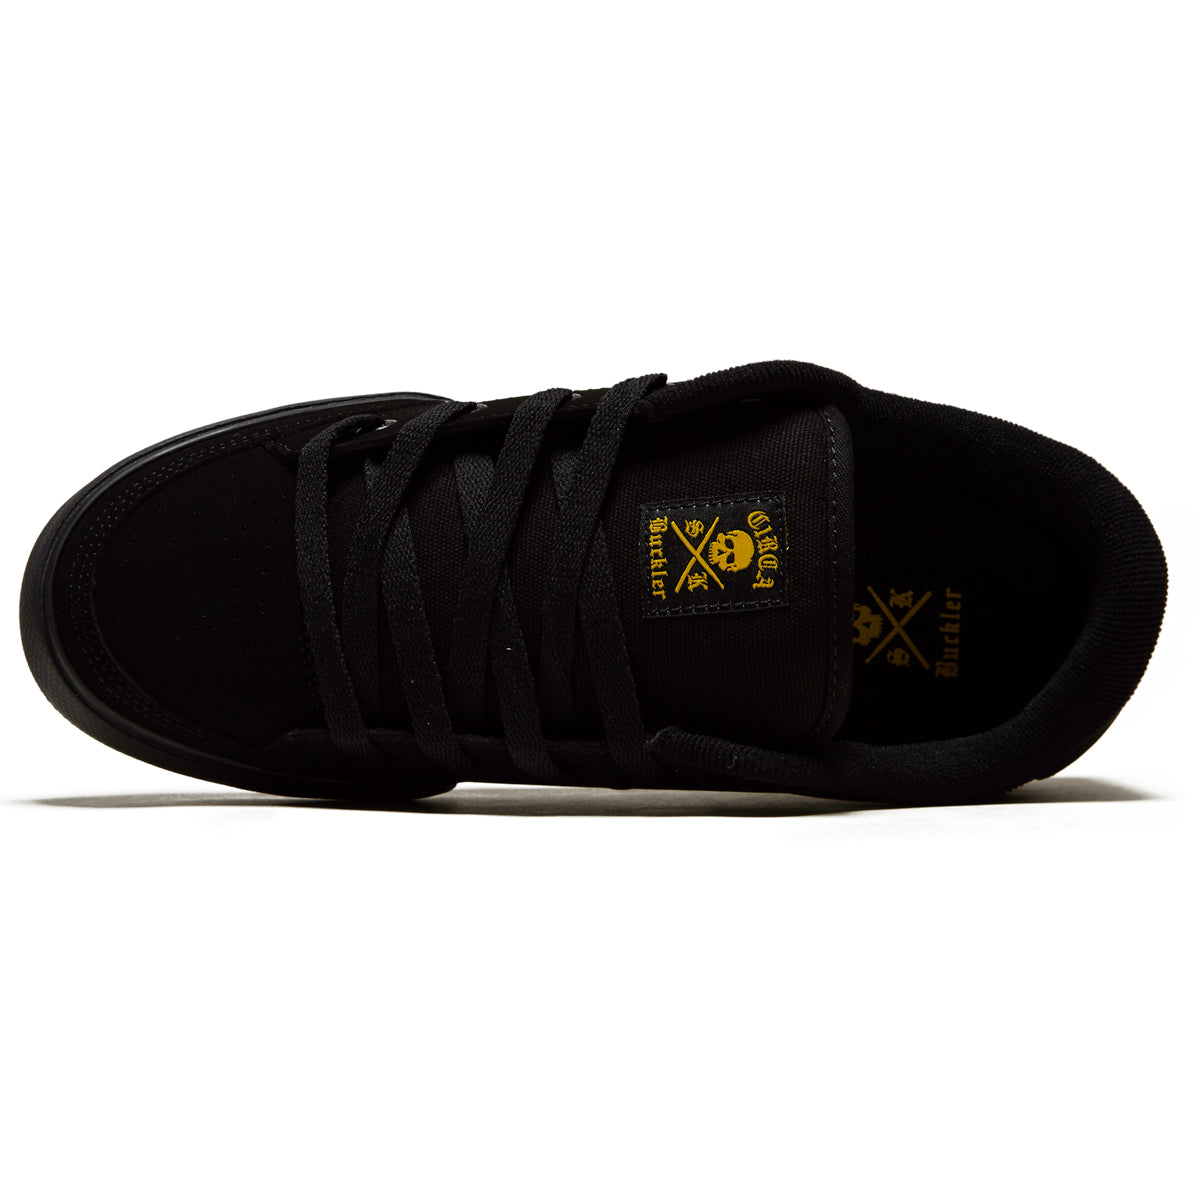 C1rca Buckler SK Shoes - Black/Spectra Yellow image 3